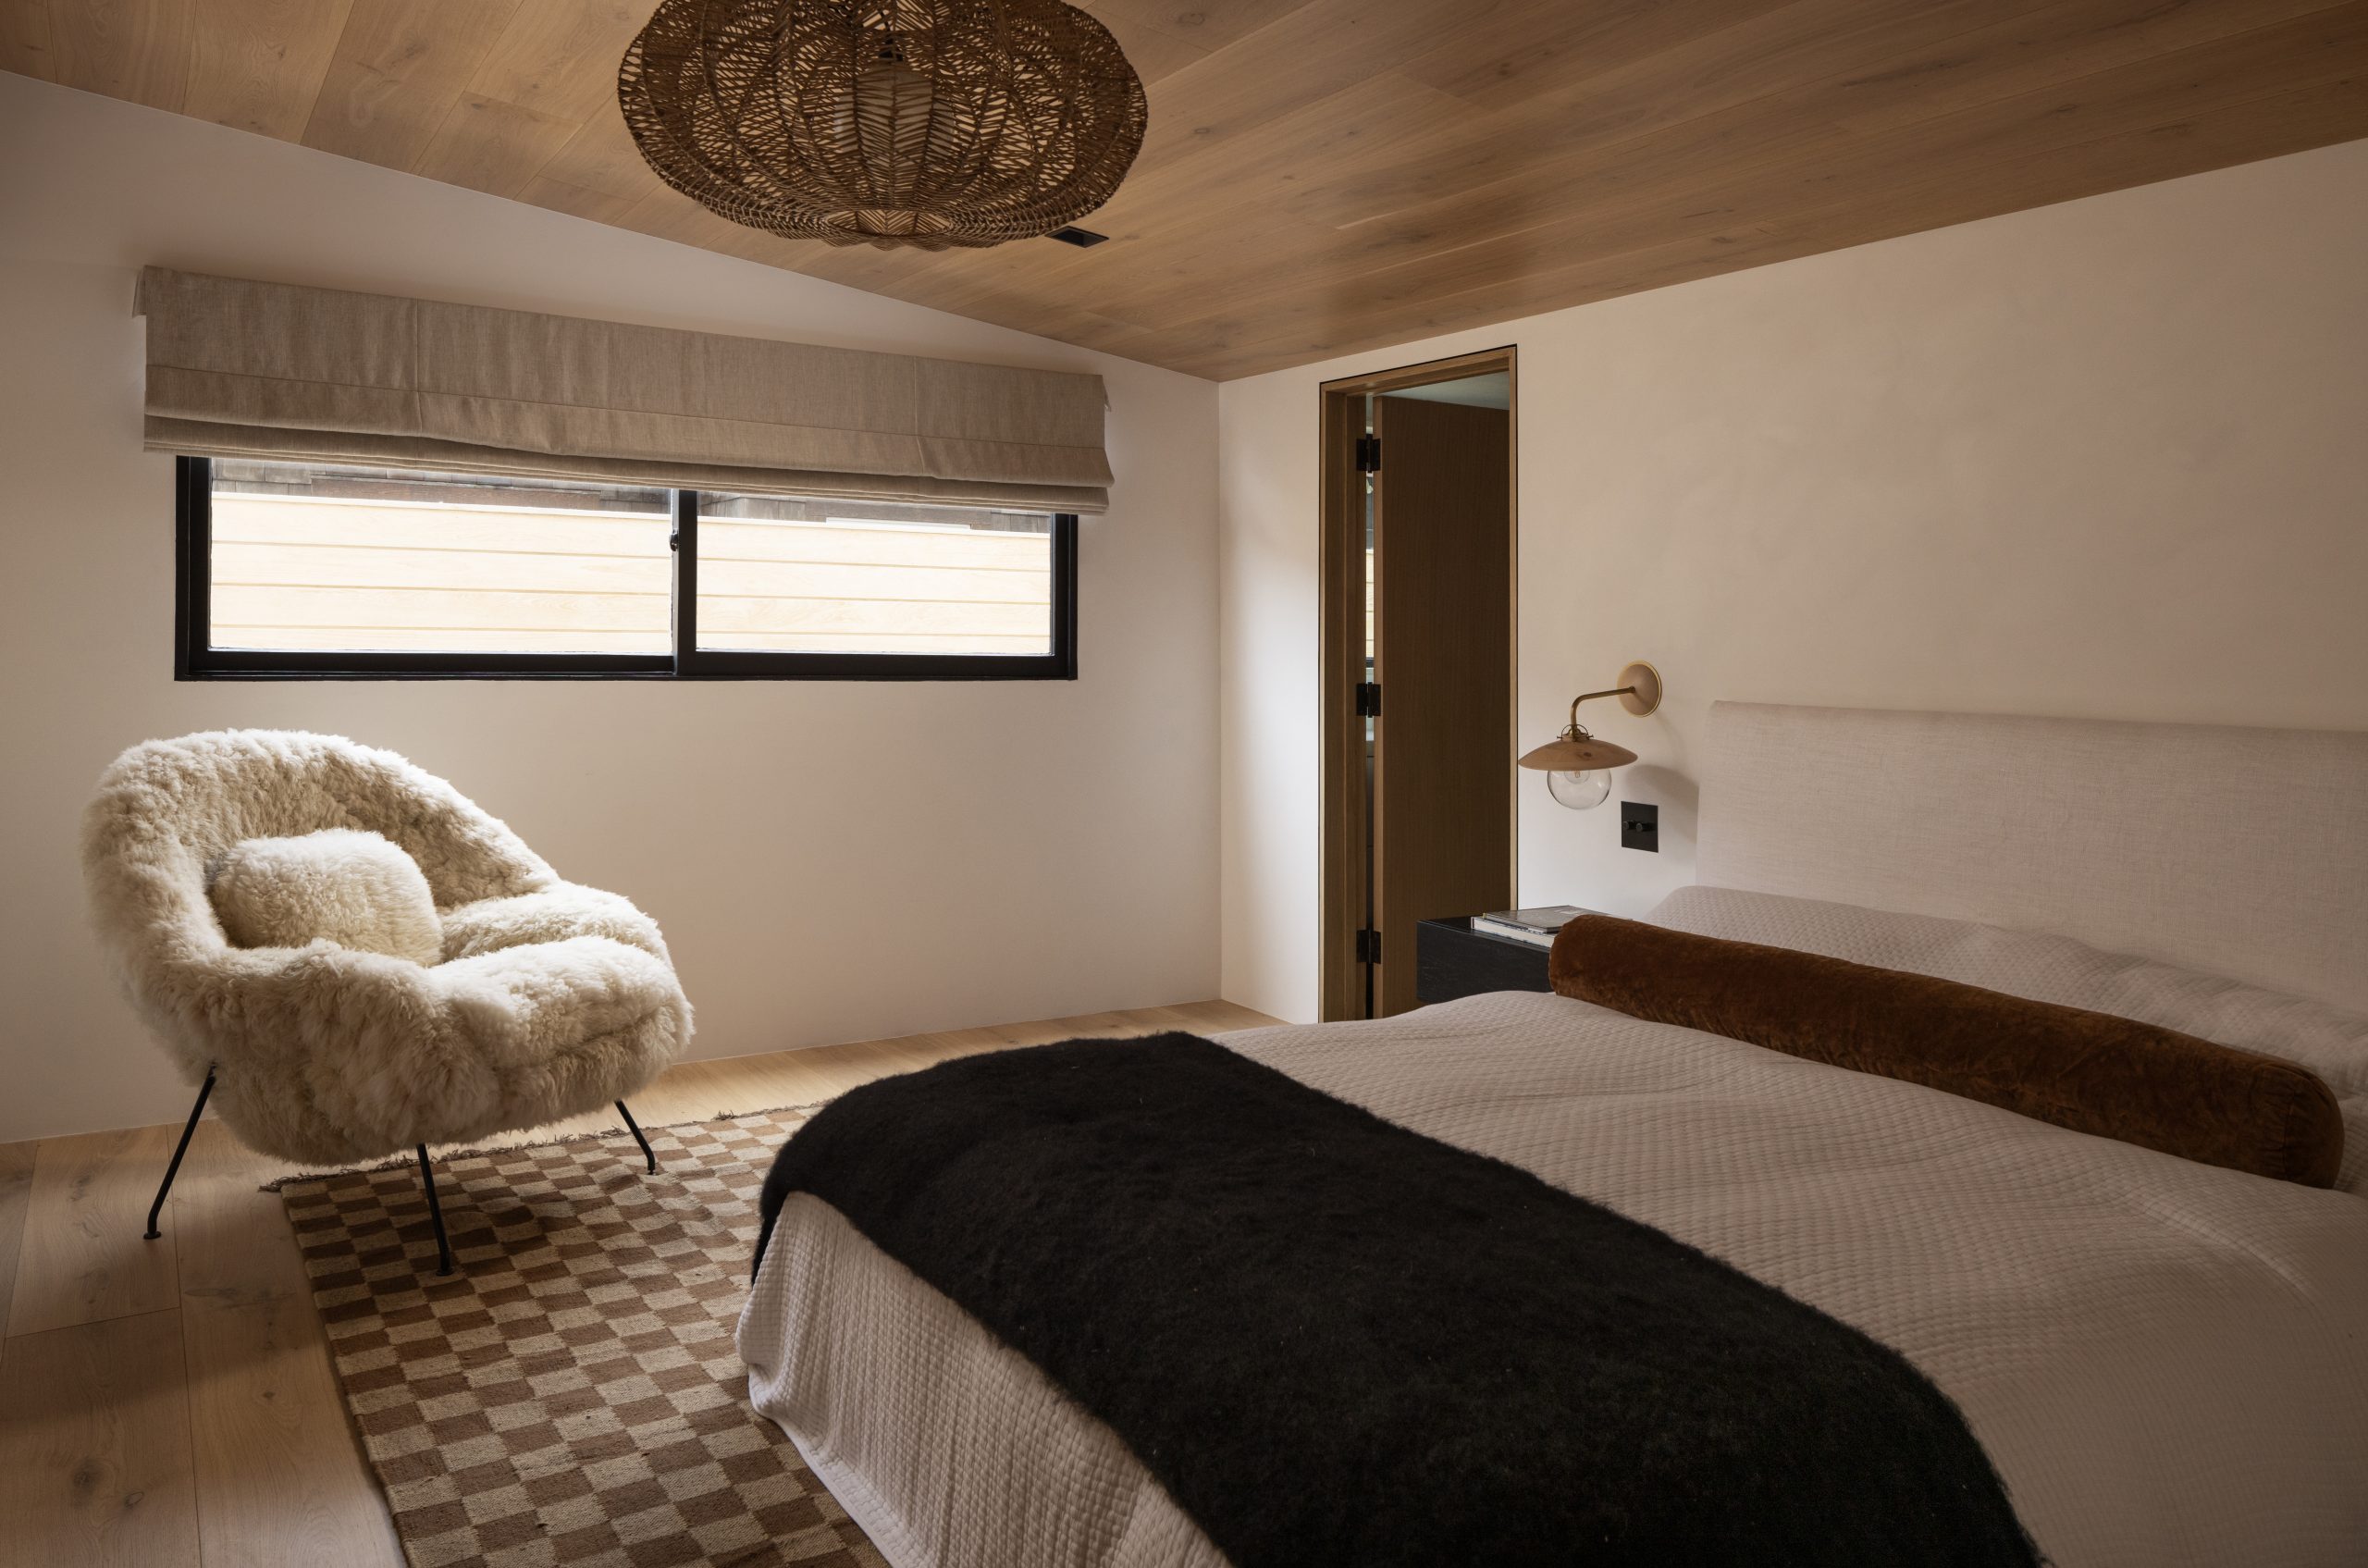 A cozy bedroom, featuring a wood-clad ceiling. 